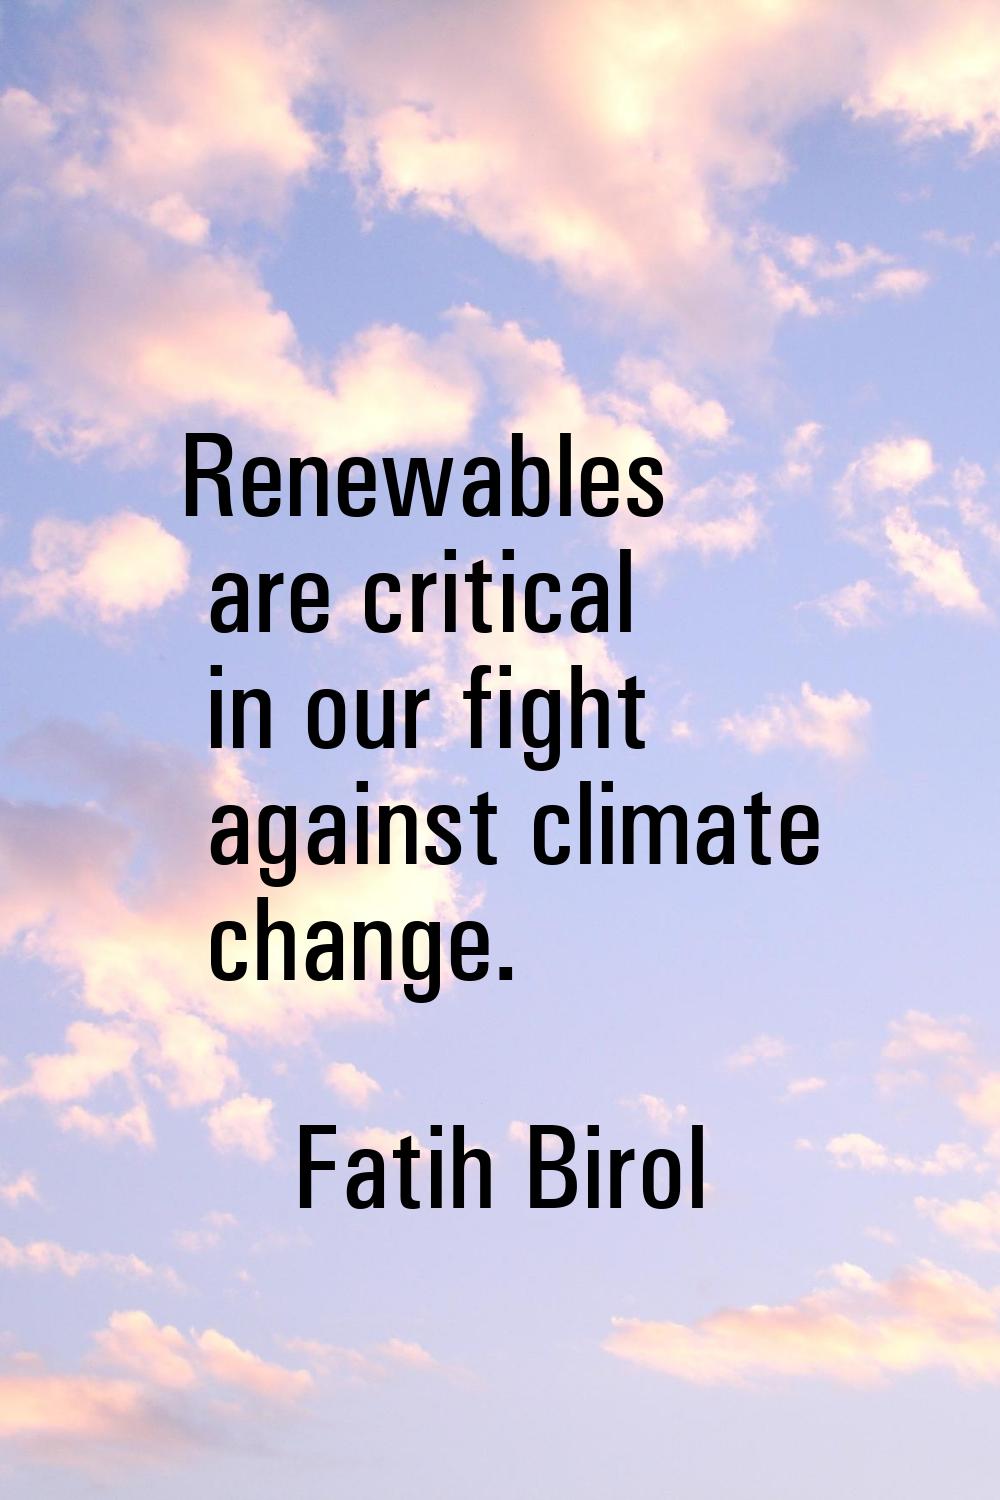 Renewables are critical in our fight against climate change.